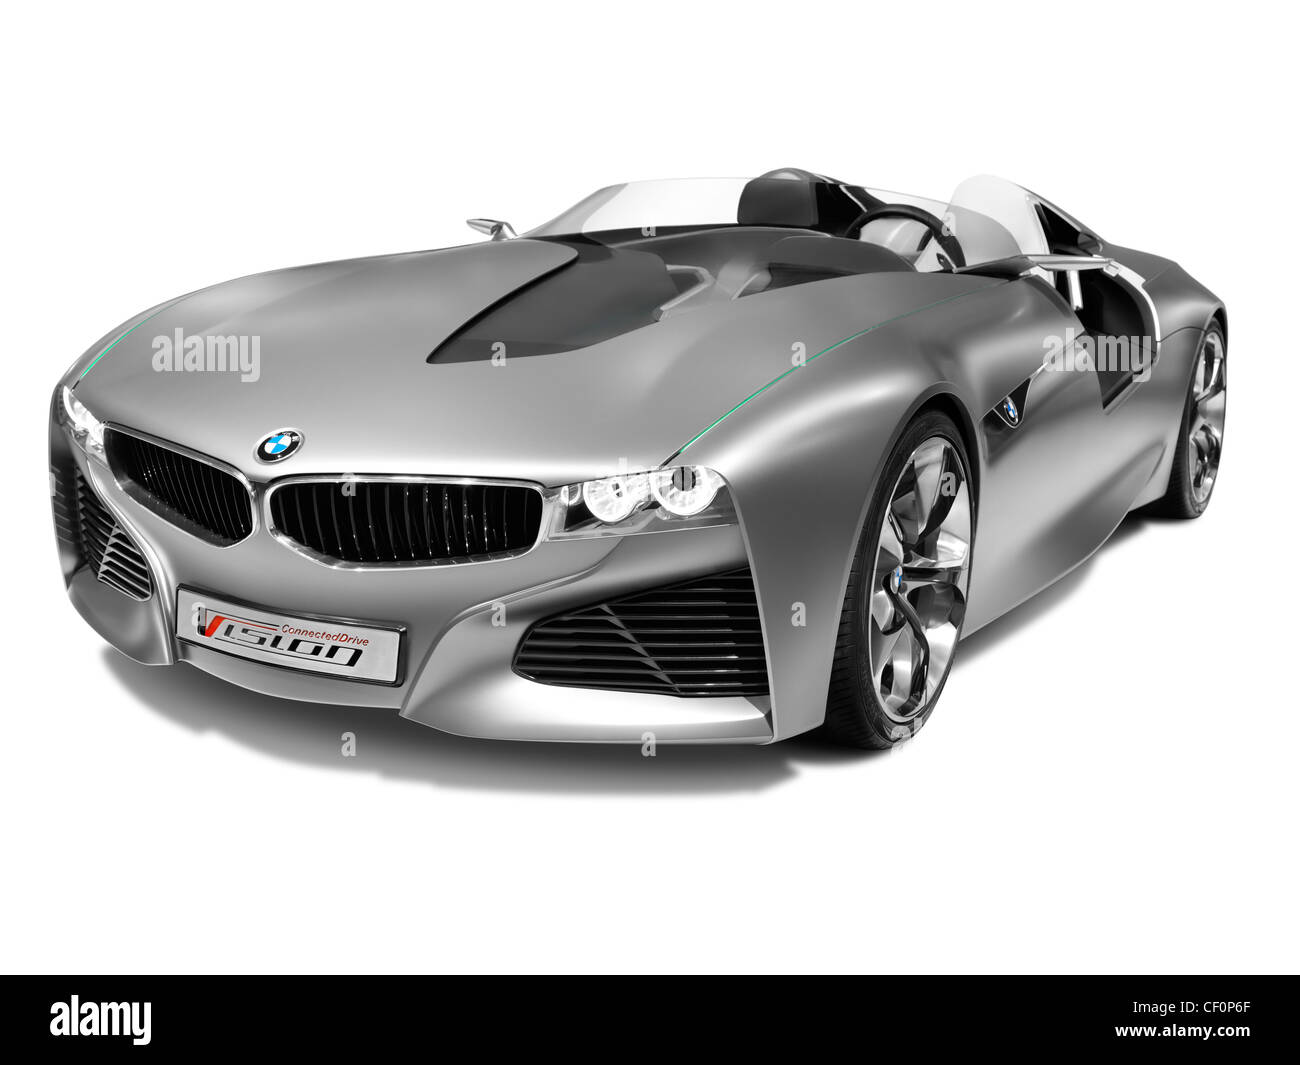 License and prints at MaximImages.com - BMW luxury car, automotive stock photo. Stock Photo